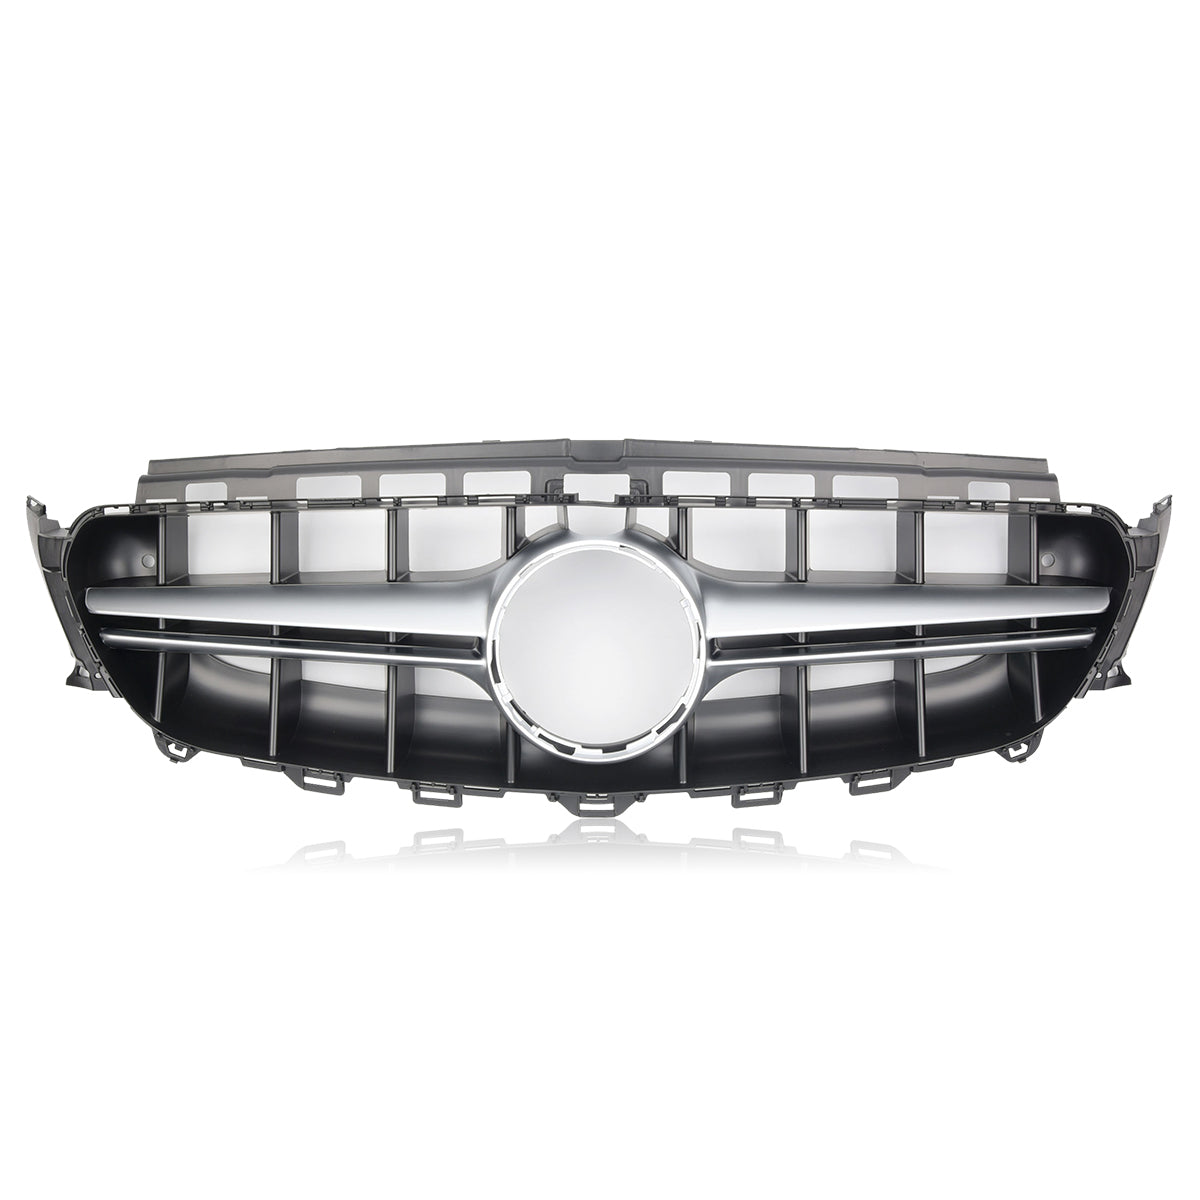 AMG E63 STYLE GRILLE FOR E-CLASS W213 2016-2018